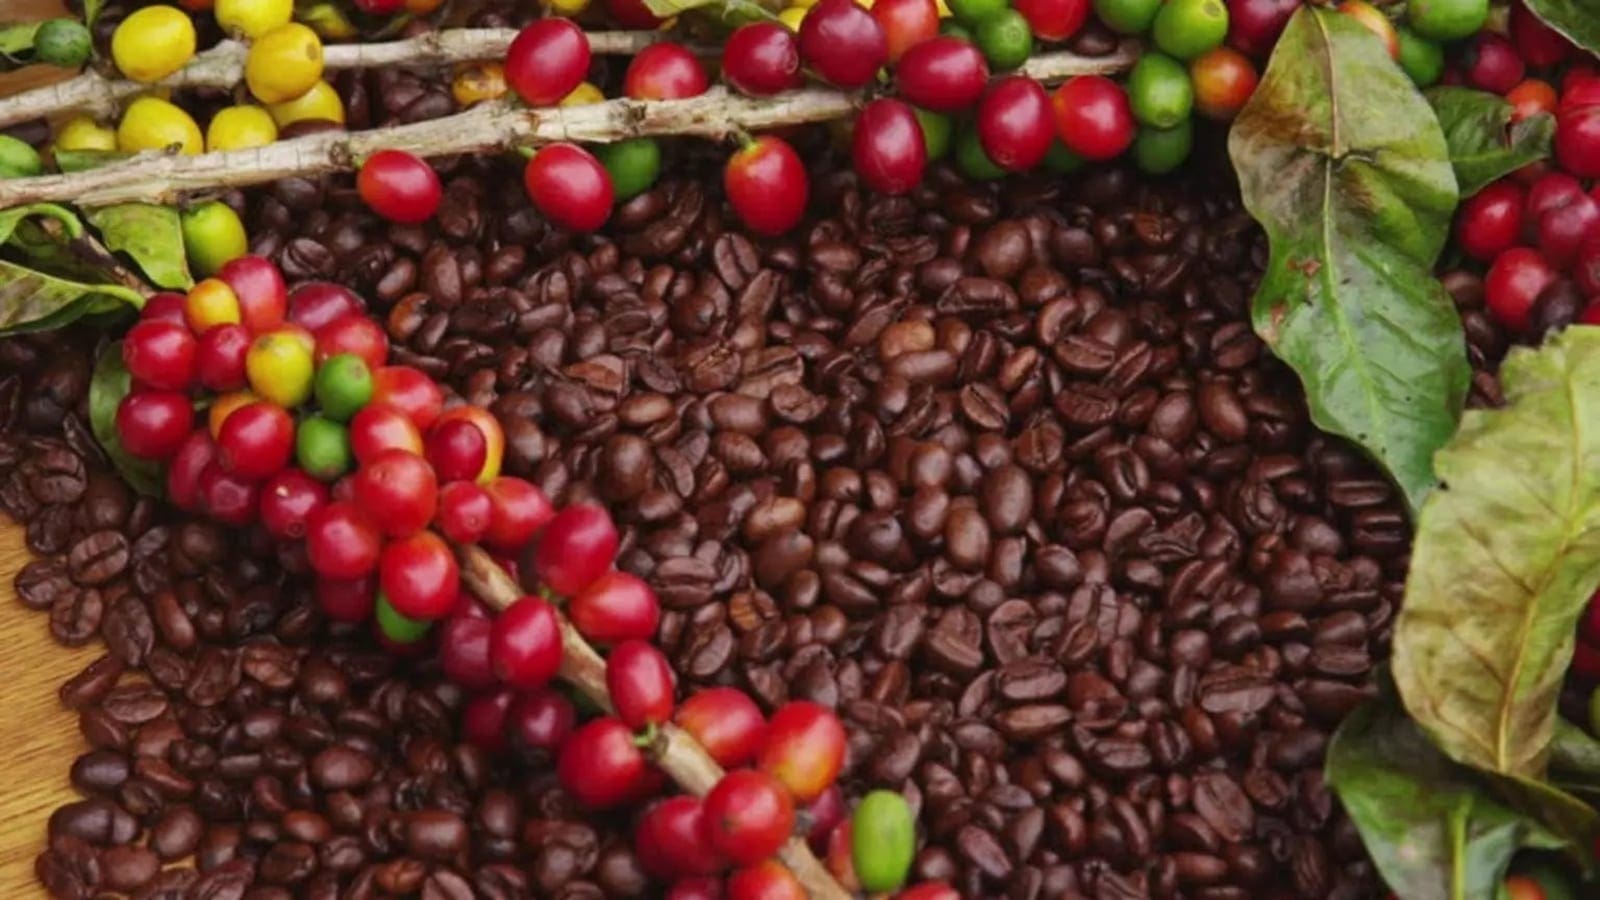 Tanzania record’s eight-year high coffee export earnings fetching US$137m in 2020/21 season